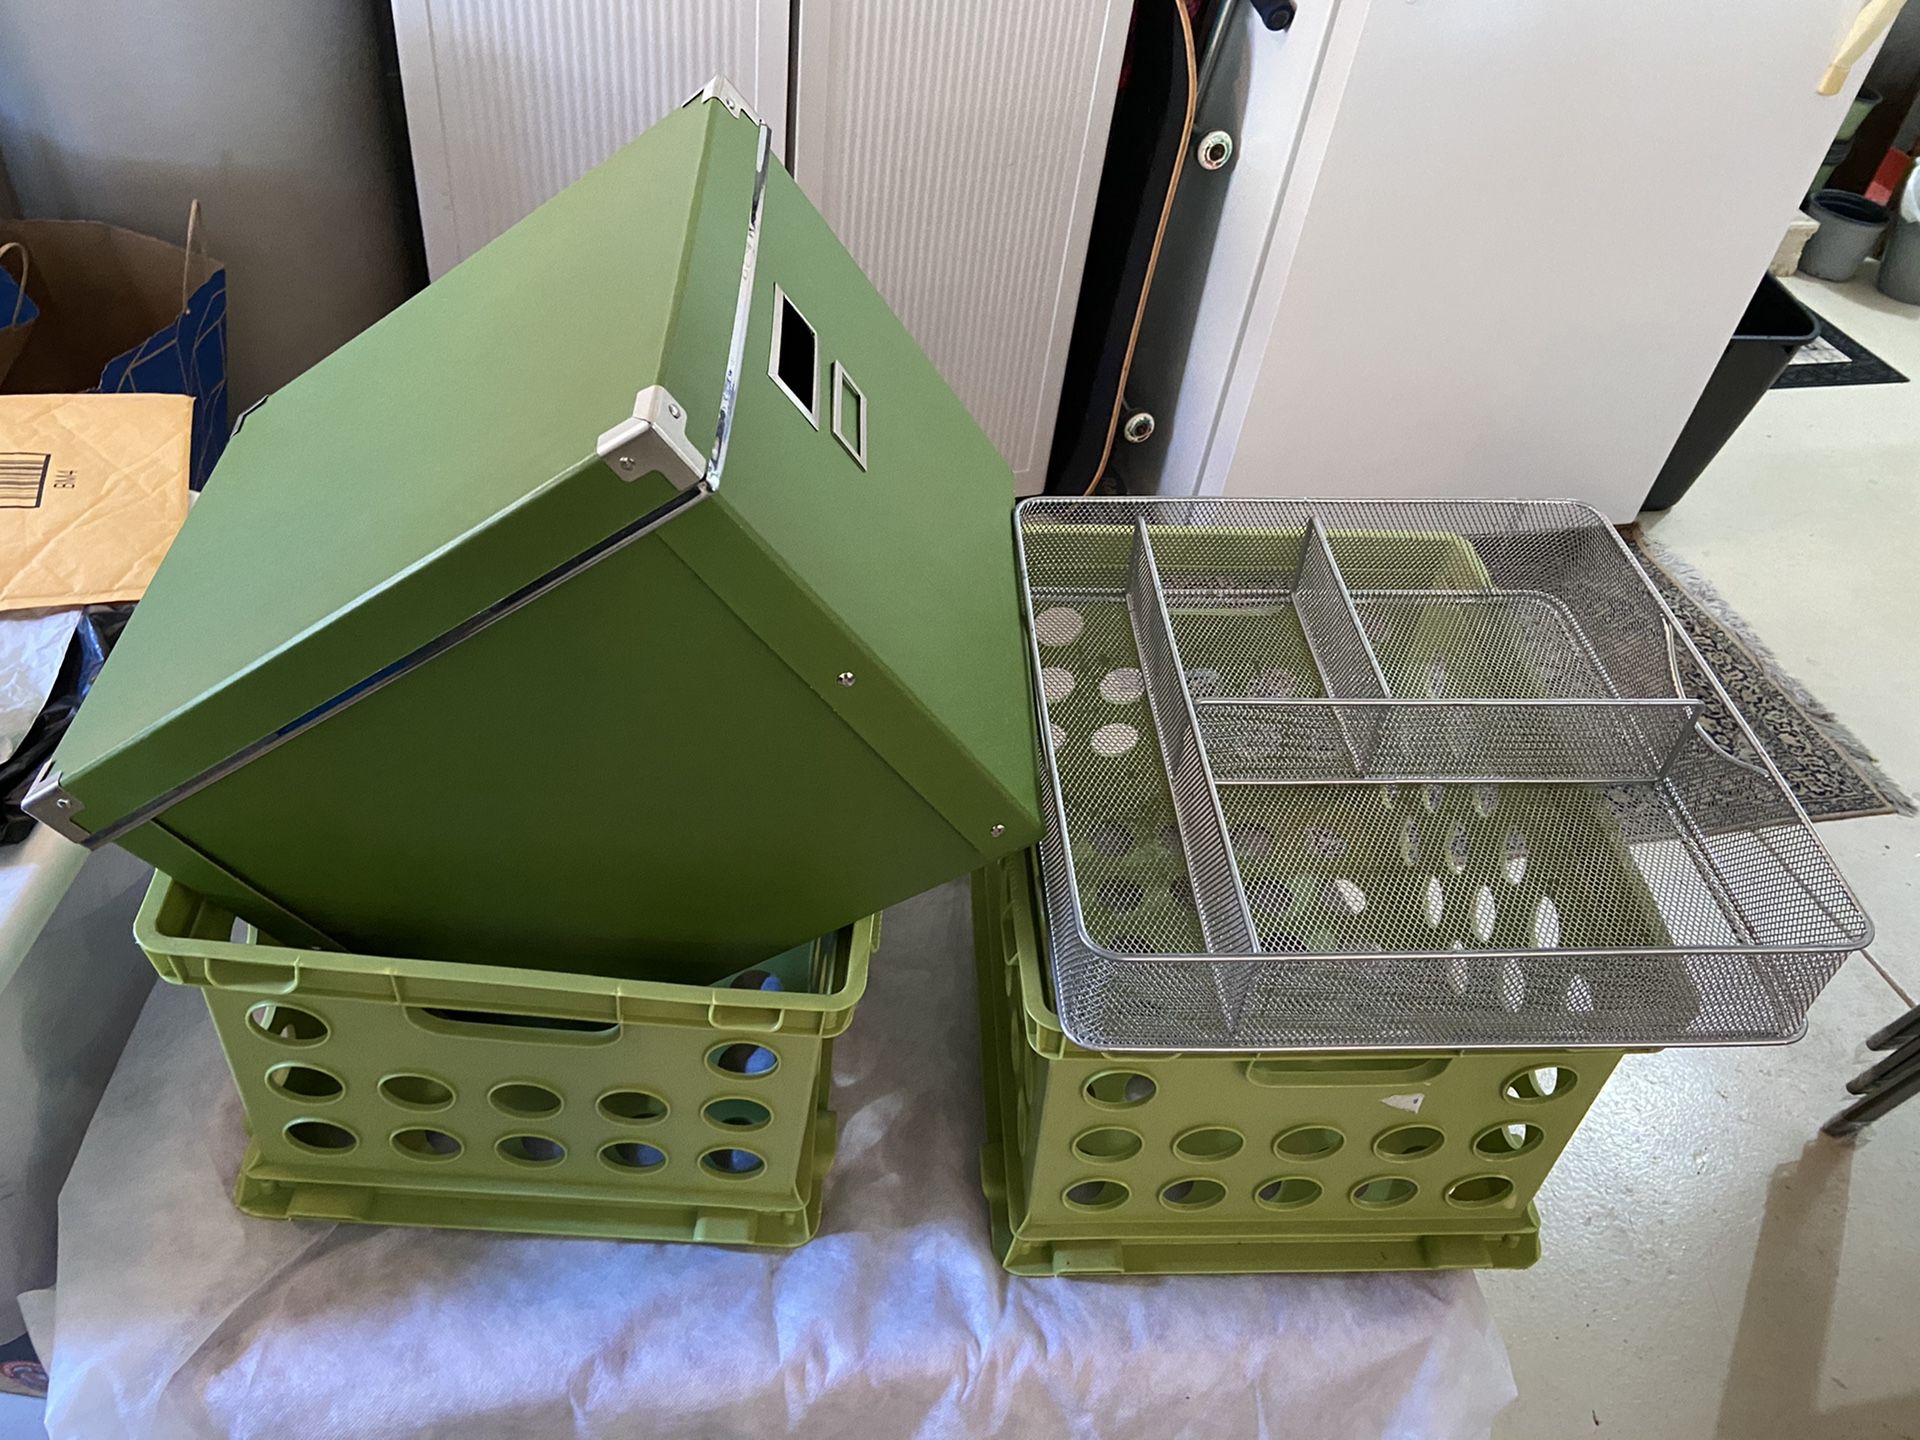 IKEA file Storage containers box crates drawer organizers